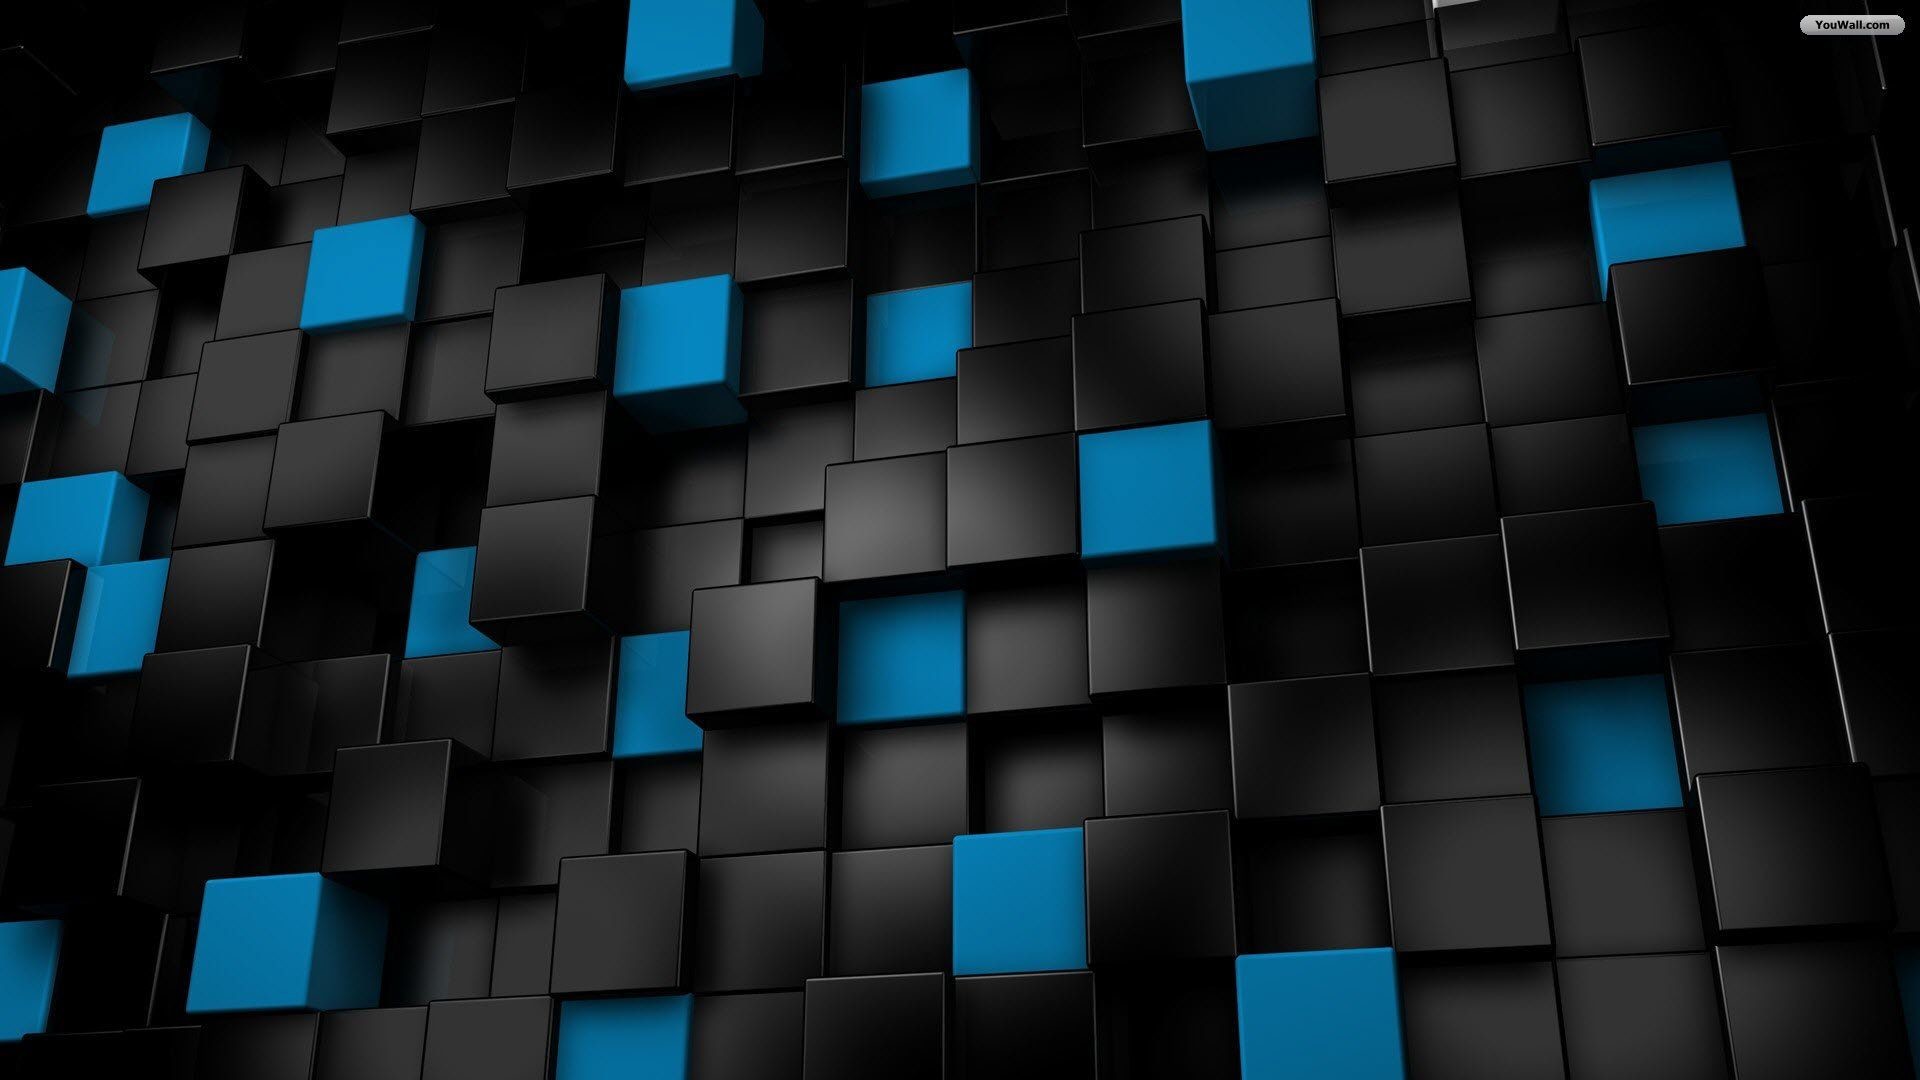 1920x1080 Black And Blue Backgrounds - Wallpaper Cave